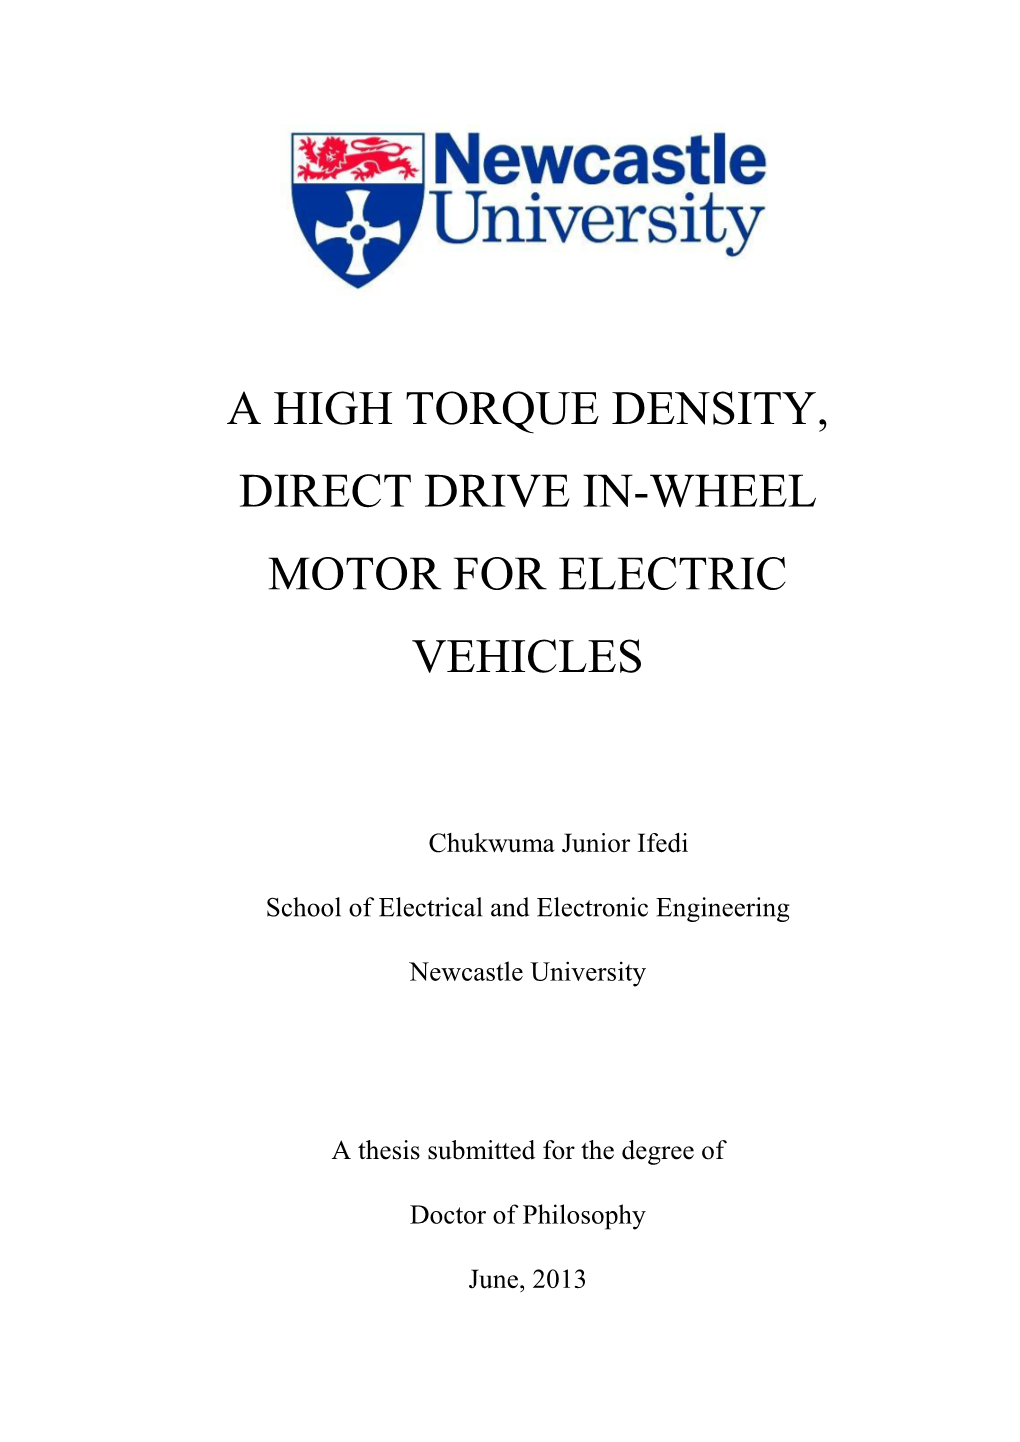 A High Torque Density, Direct Drive In-Wheel Motor for Electric Vehicles